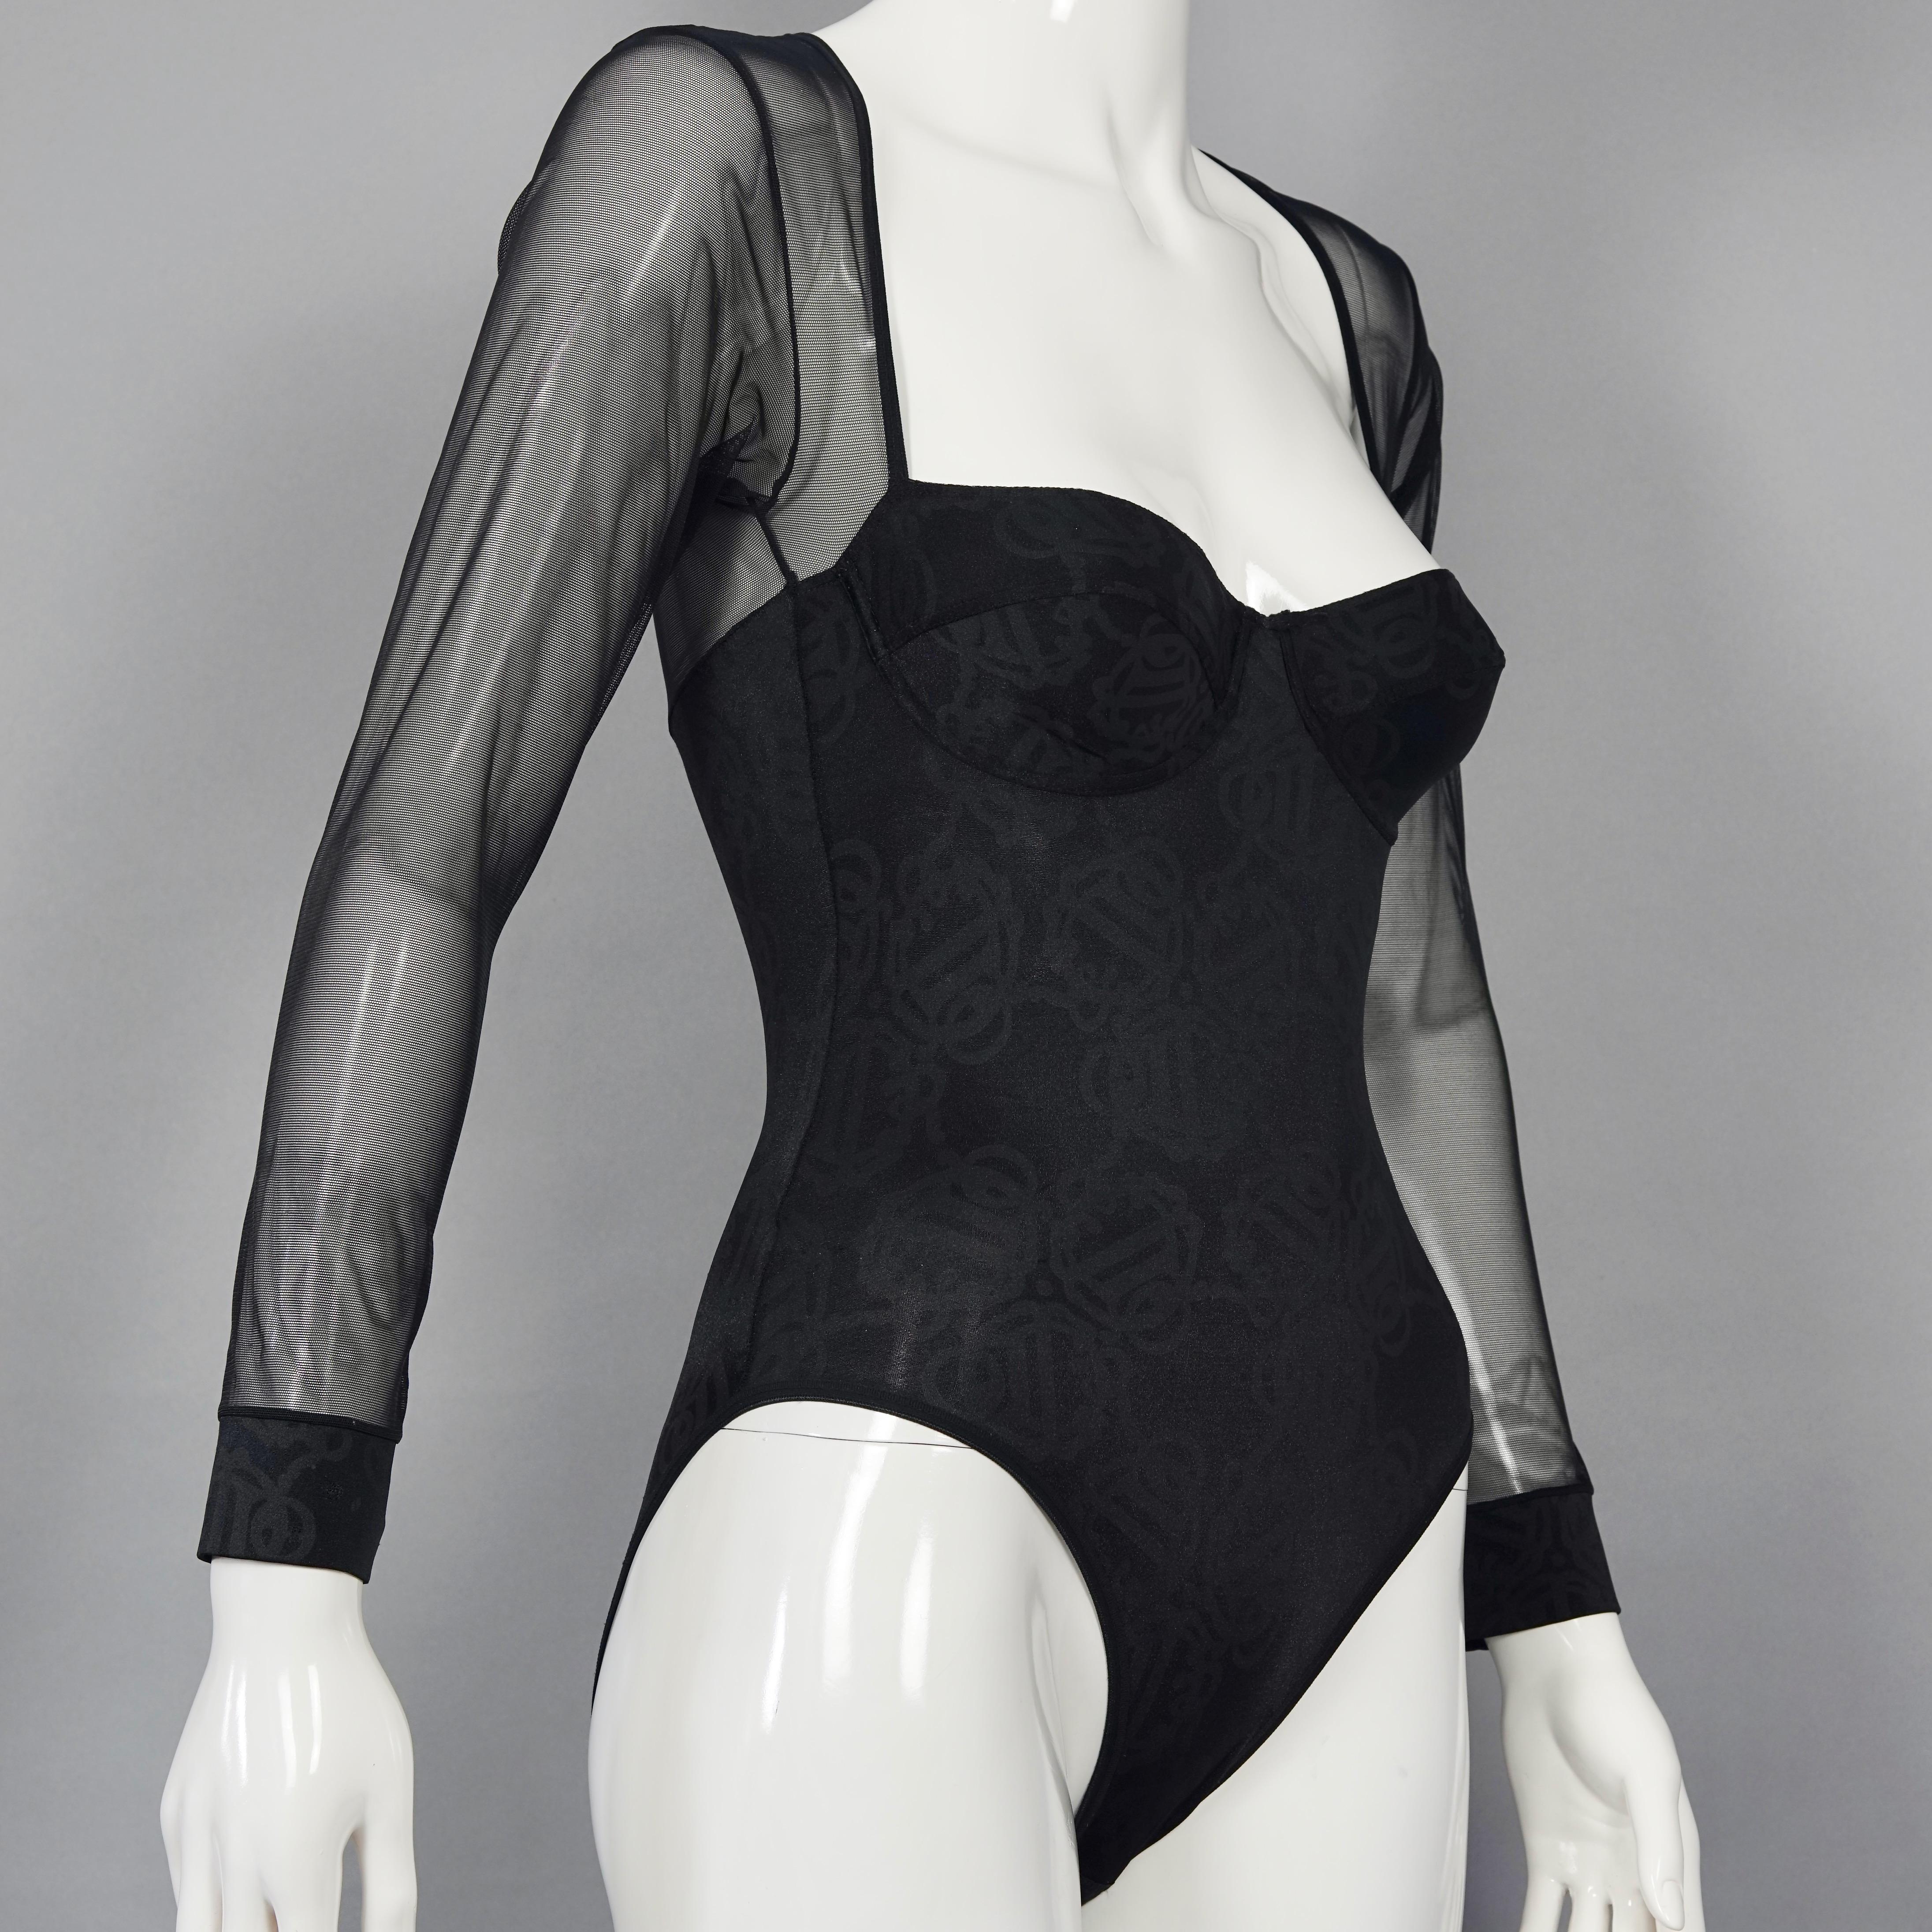 Vintage CHRISTIAN DIOR Insignia Logo Monogram Black Bodysuit

Measurements taken laid flat, please double bust, waist and hips:
Shoulder: 13.38 inches (34 cm) without stretching
Sleeves: 20.47 inches (52 cm) without stretching
Bust: 12.60 inches (32